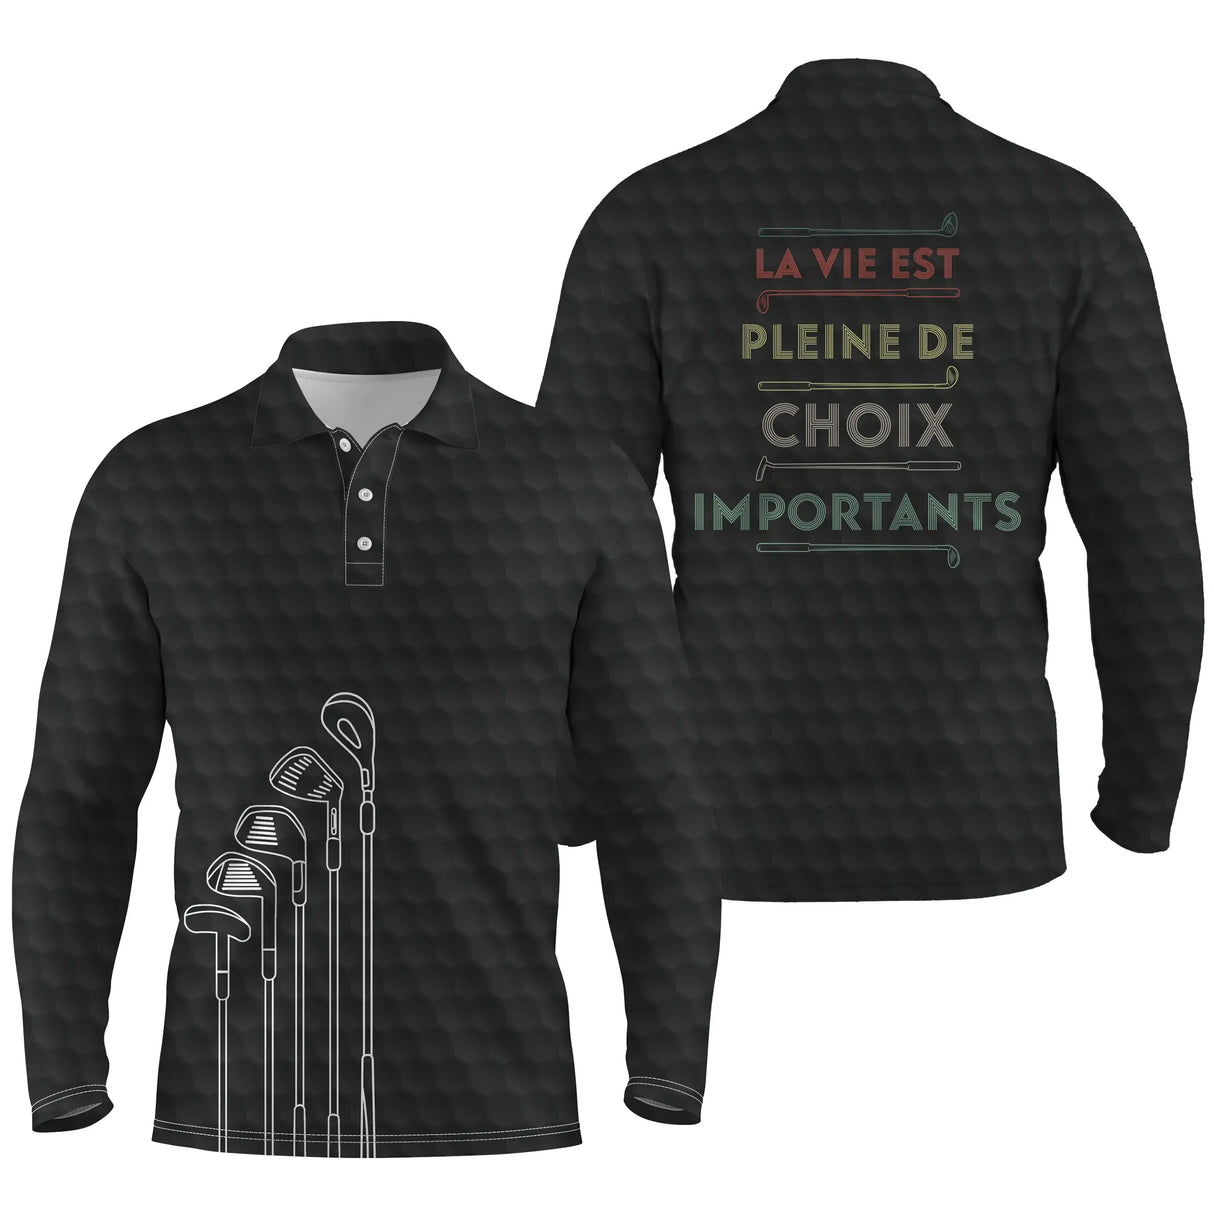 Chiptshirts - Golf Polo Shirt, Original Gift for Golf Fans, Men's and Women's Sports Polo Shirt, Golf Club, Retro Vintage, Life is Full of Important Choices - CTS26052234